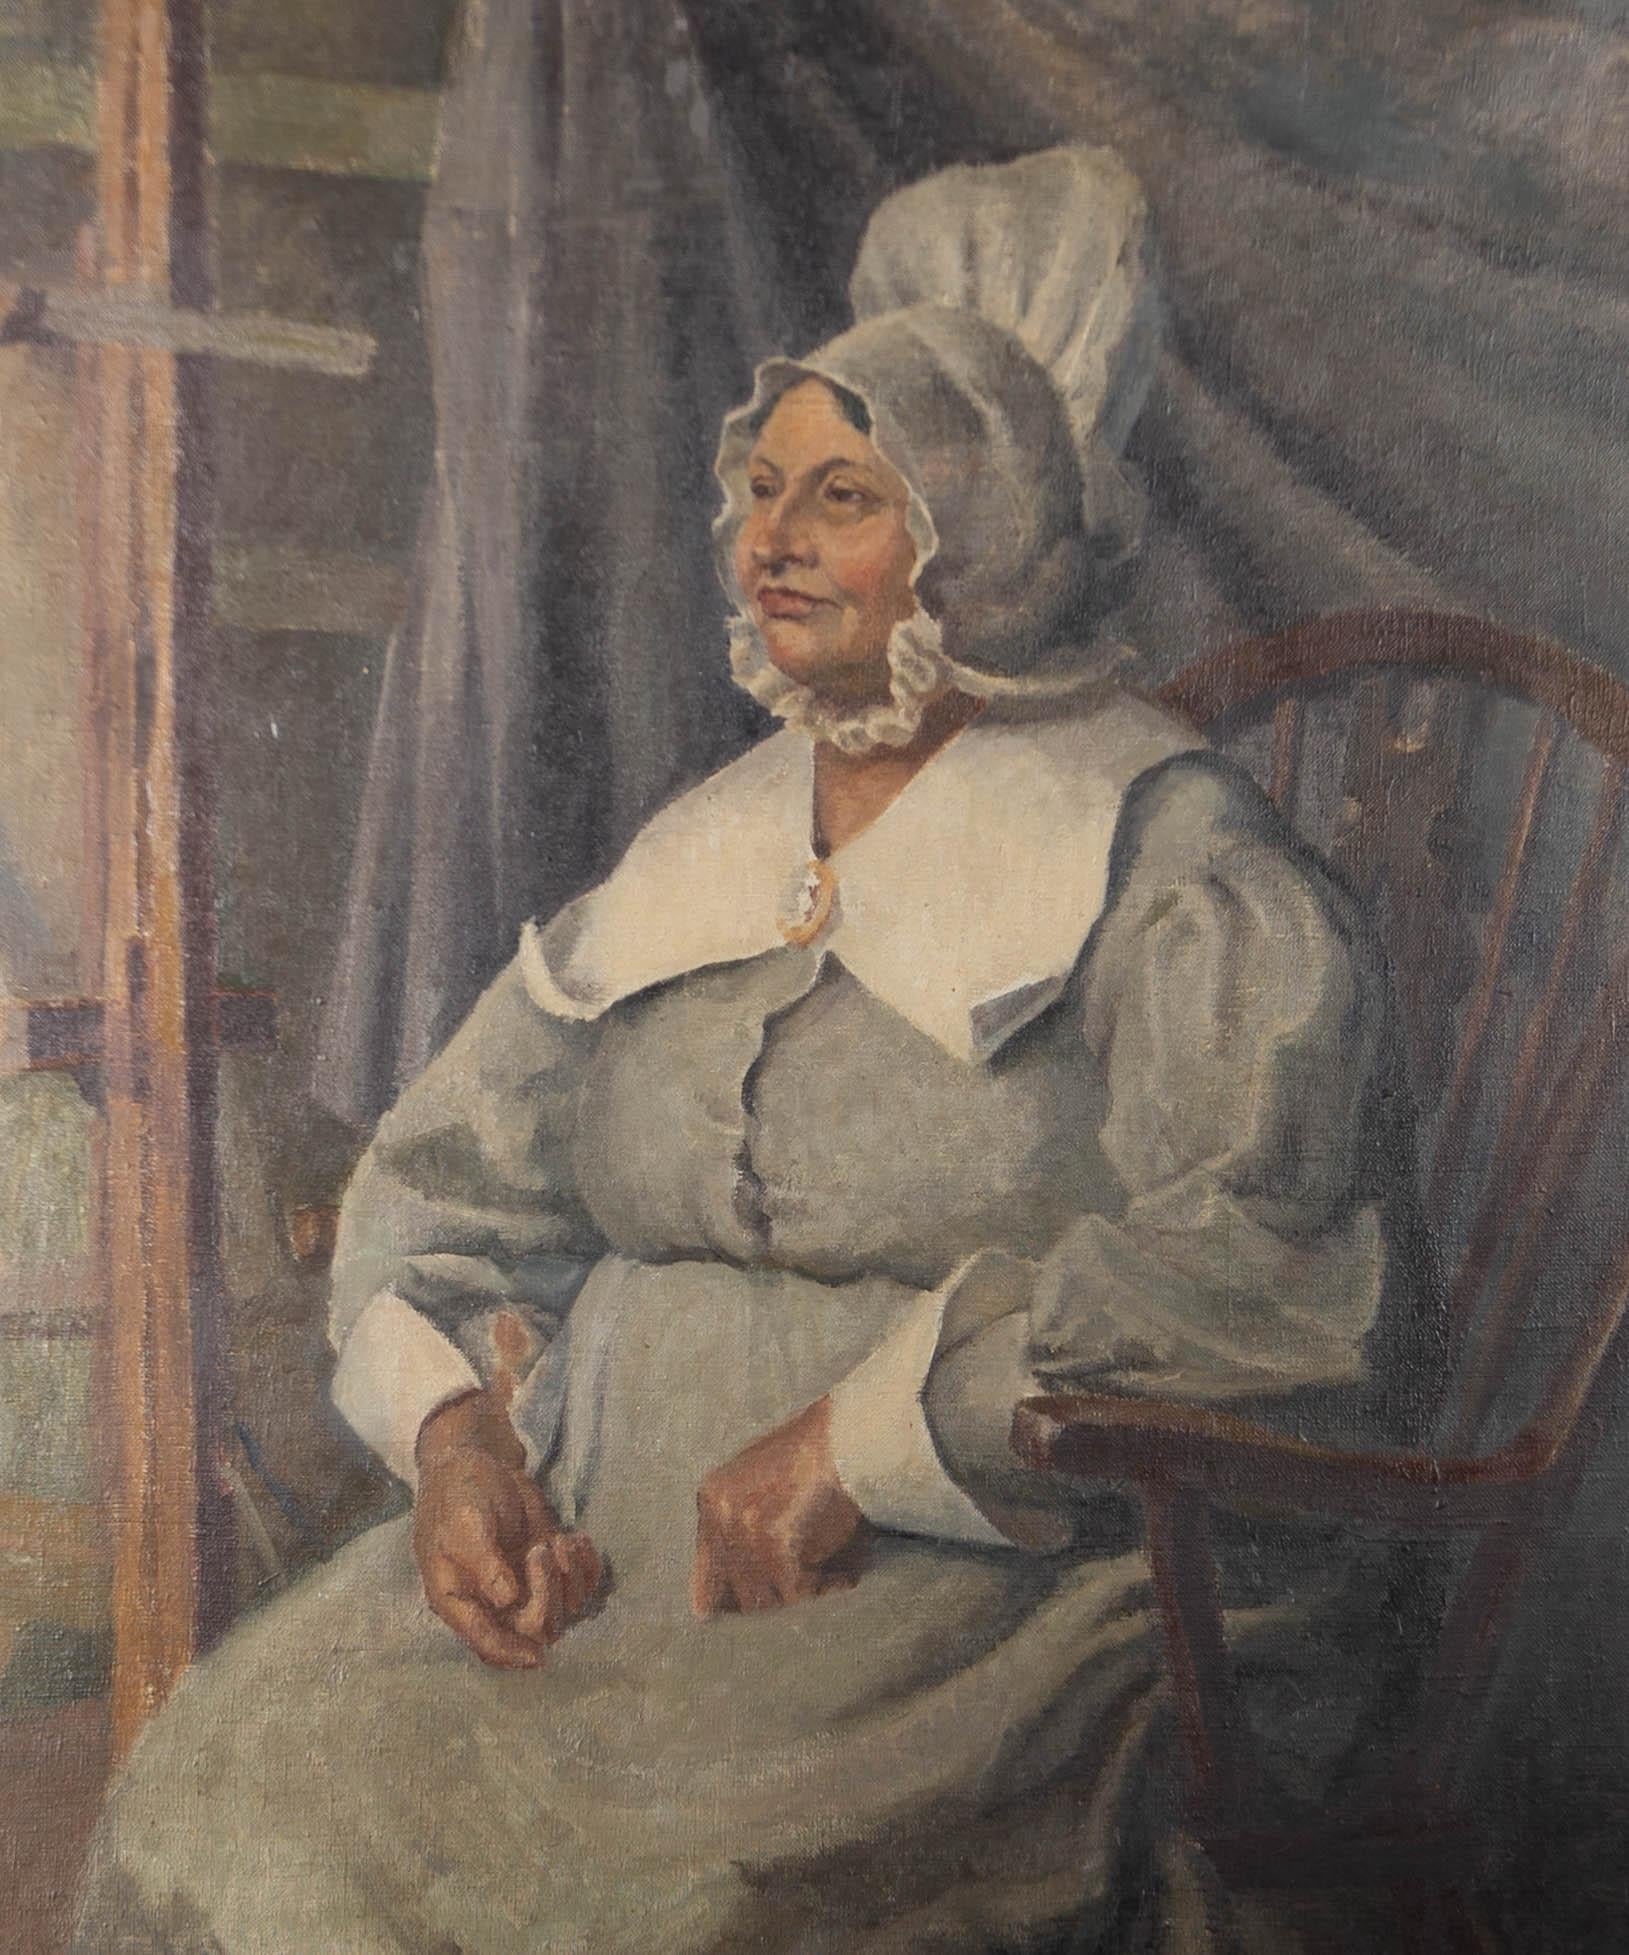 An unusual portrait of a middle aged woman dressed in 19th century Quaker costume, by Nora Braham. Braham was a student at the Slade School and it is very likely this painting was completed during her time in London. The portrait is well presented